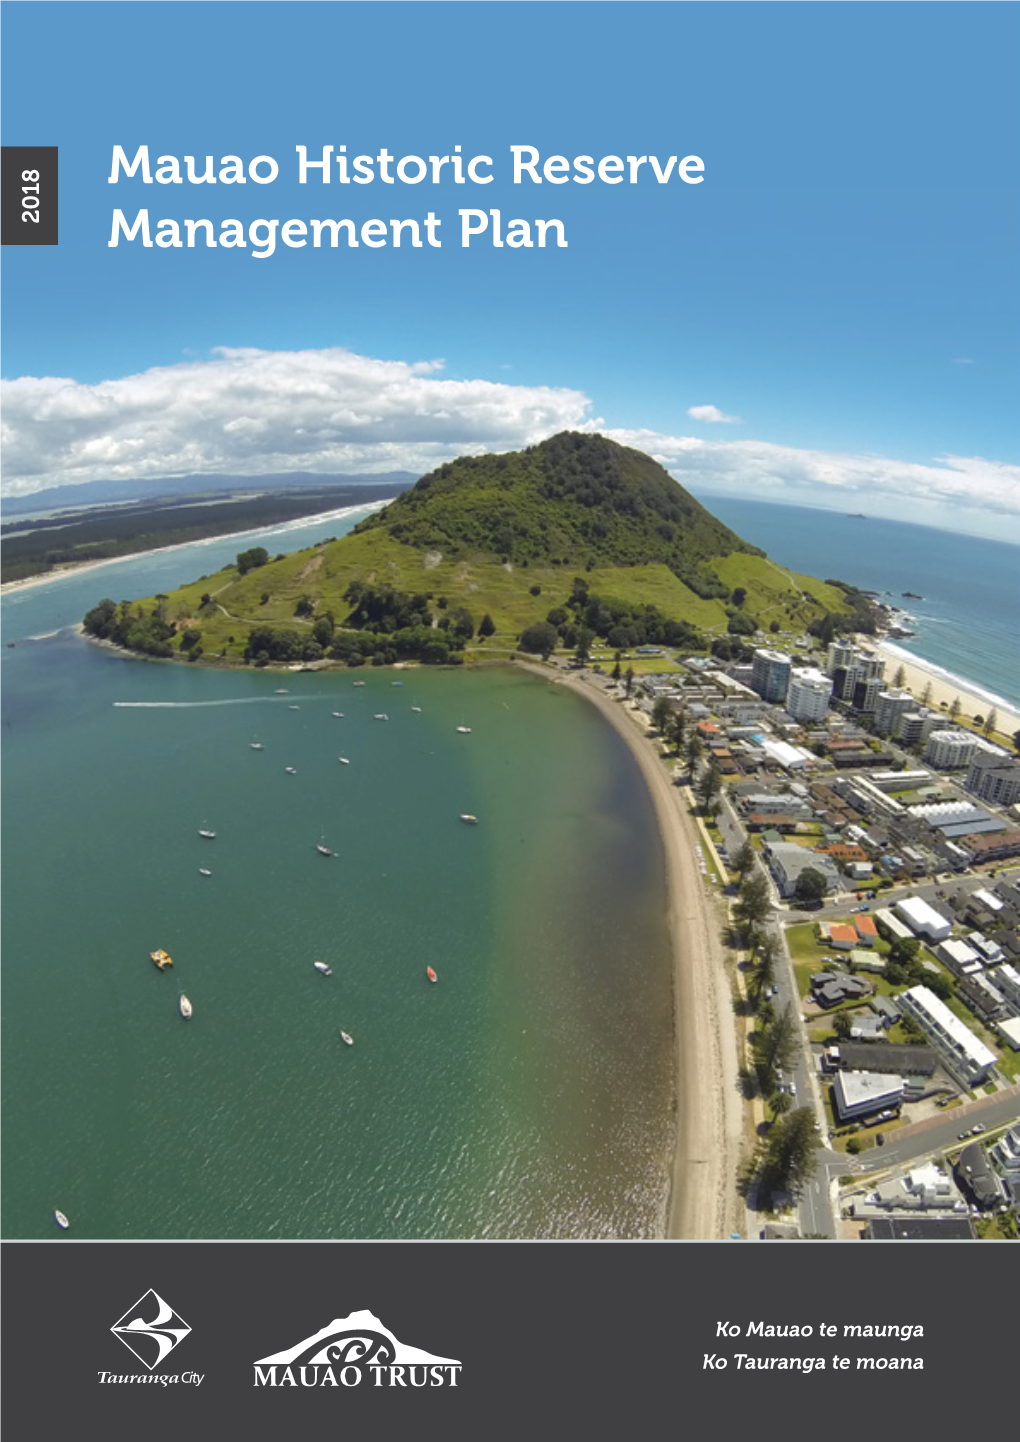 MAUAO HISTORIC RESERVE MANAGEMENT PLAN to Continue to Meet the Appropriate Recreational and Amenity Needs of Residents and Visitors 5.3